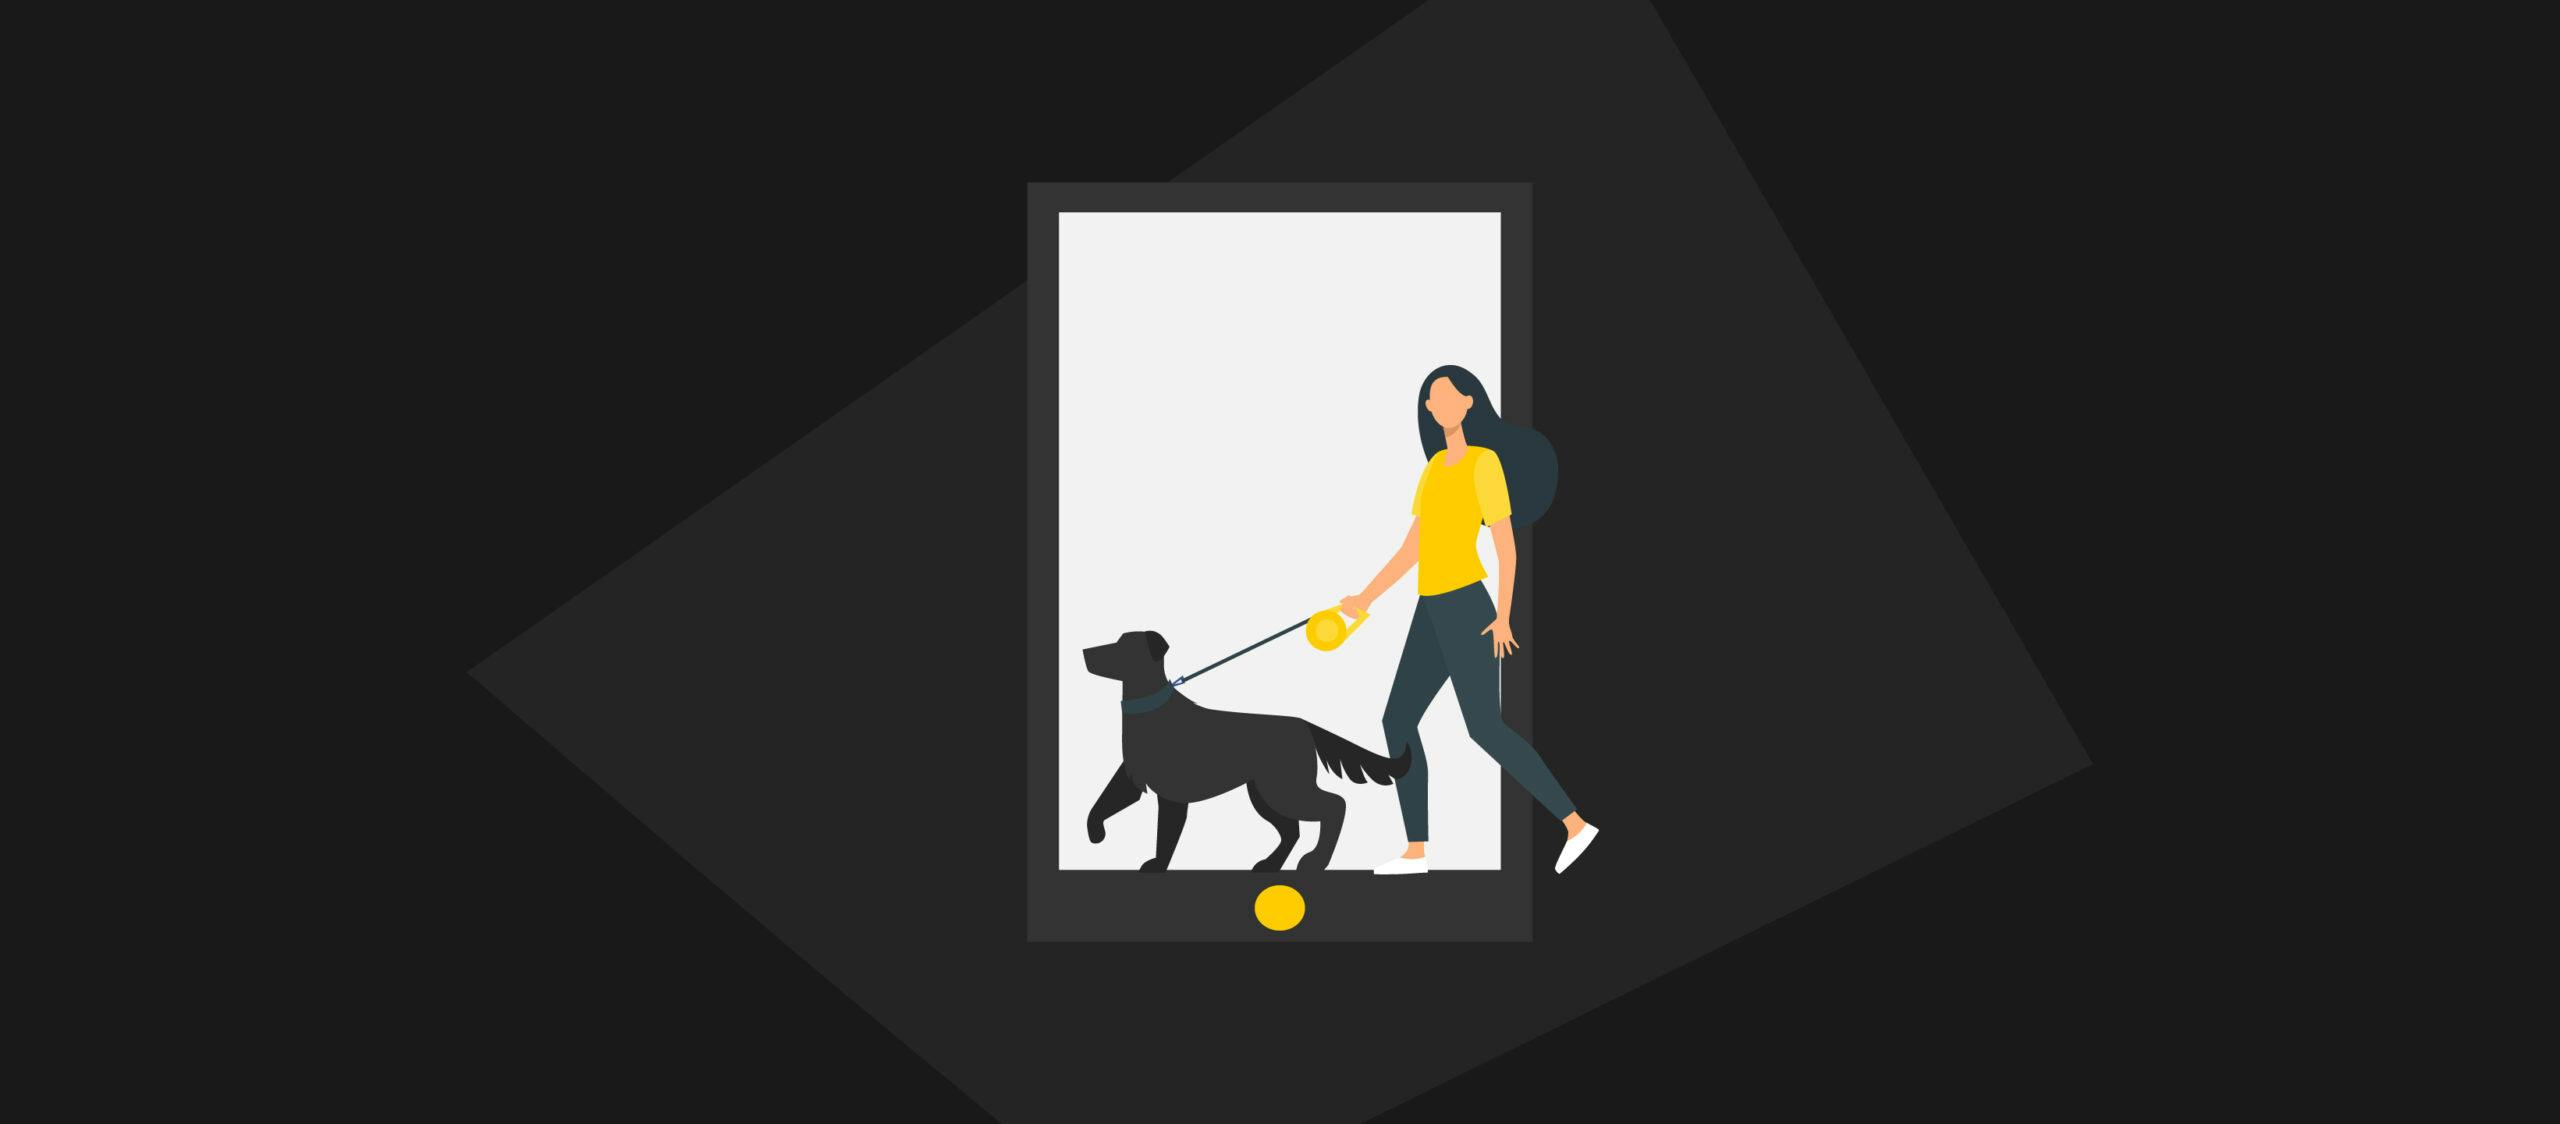 Puppy Love on Demand: How to Create a Dog Walking App?